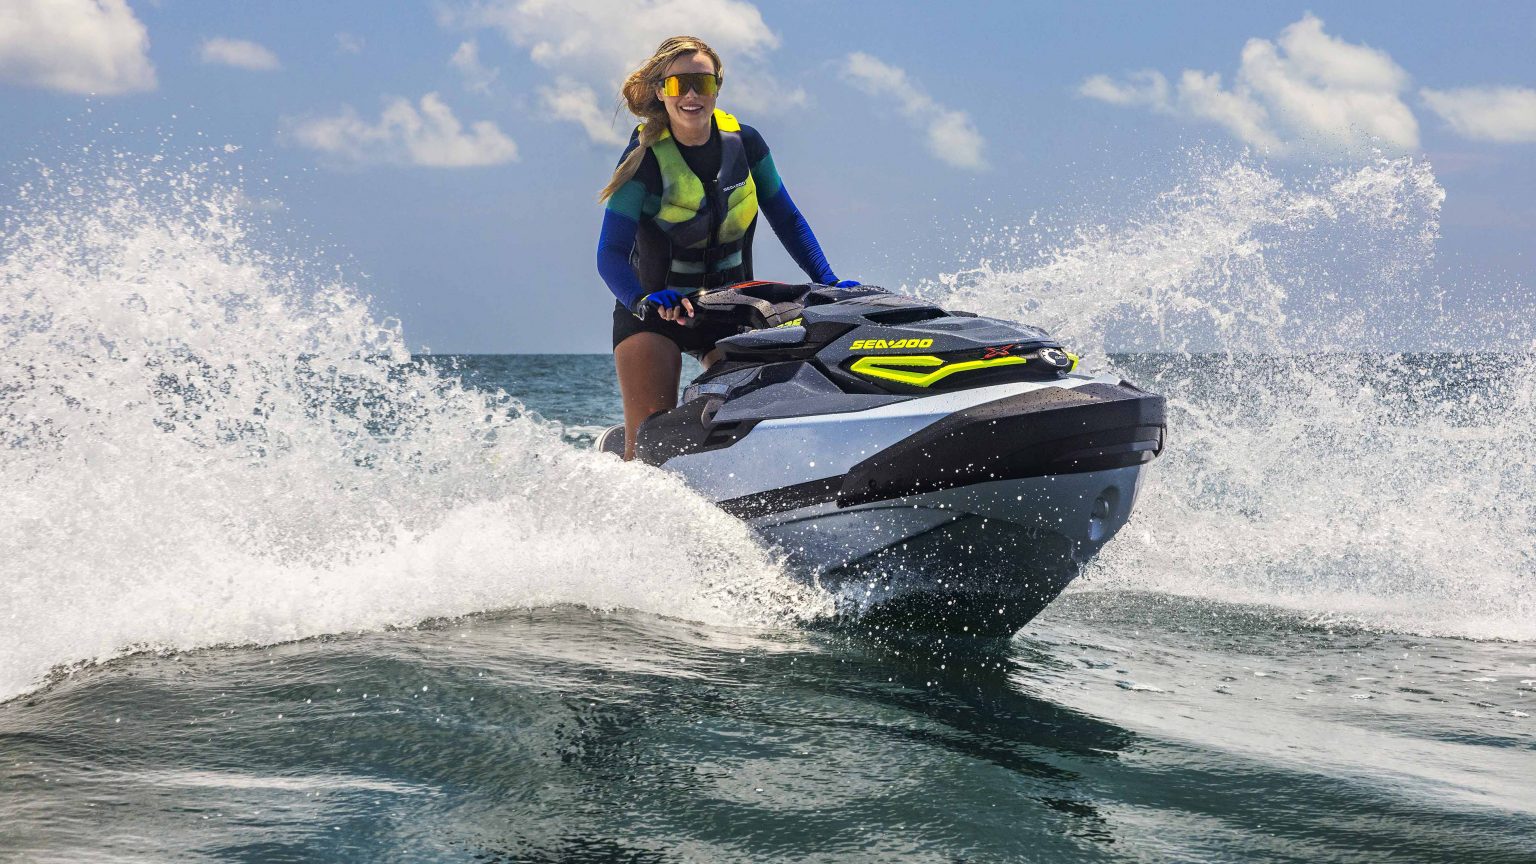 2024 seadoo prices and model changes Archives